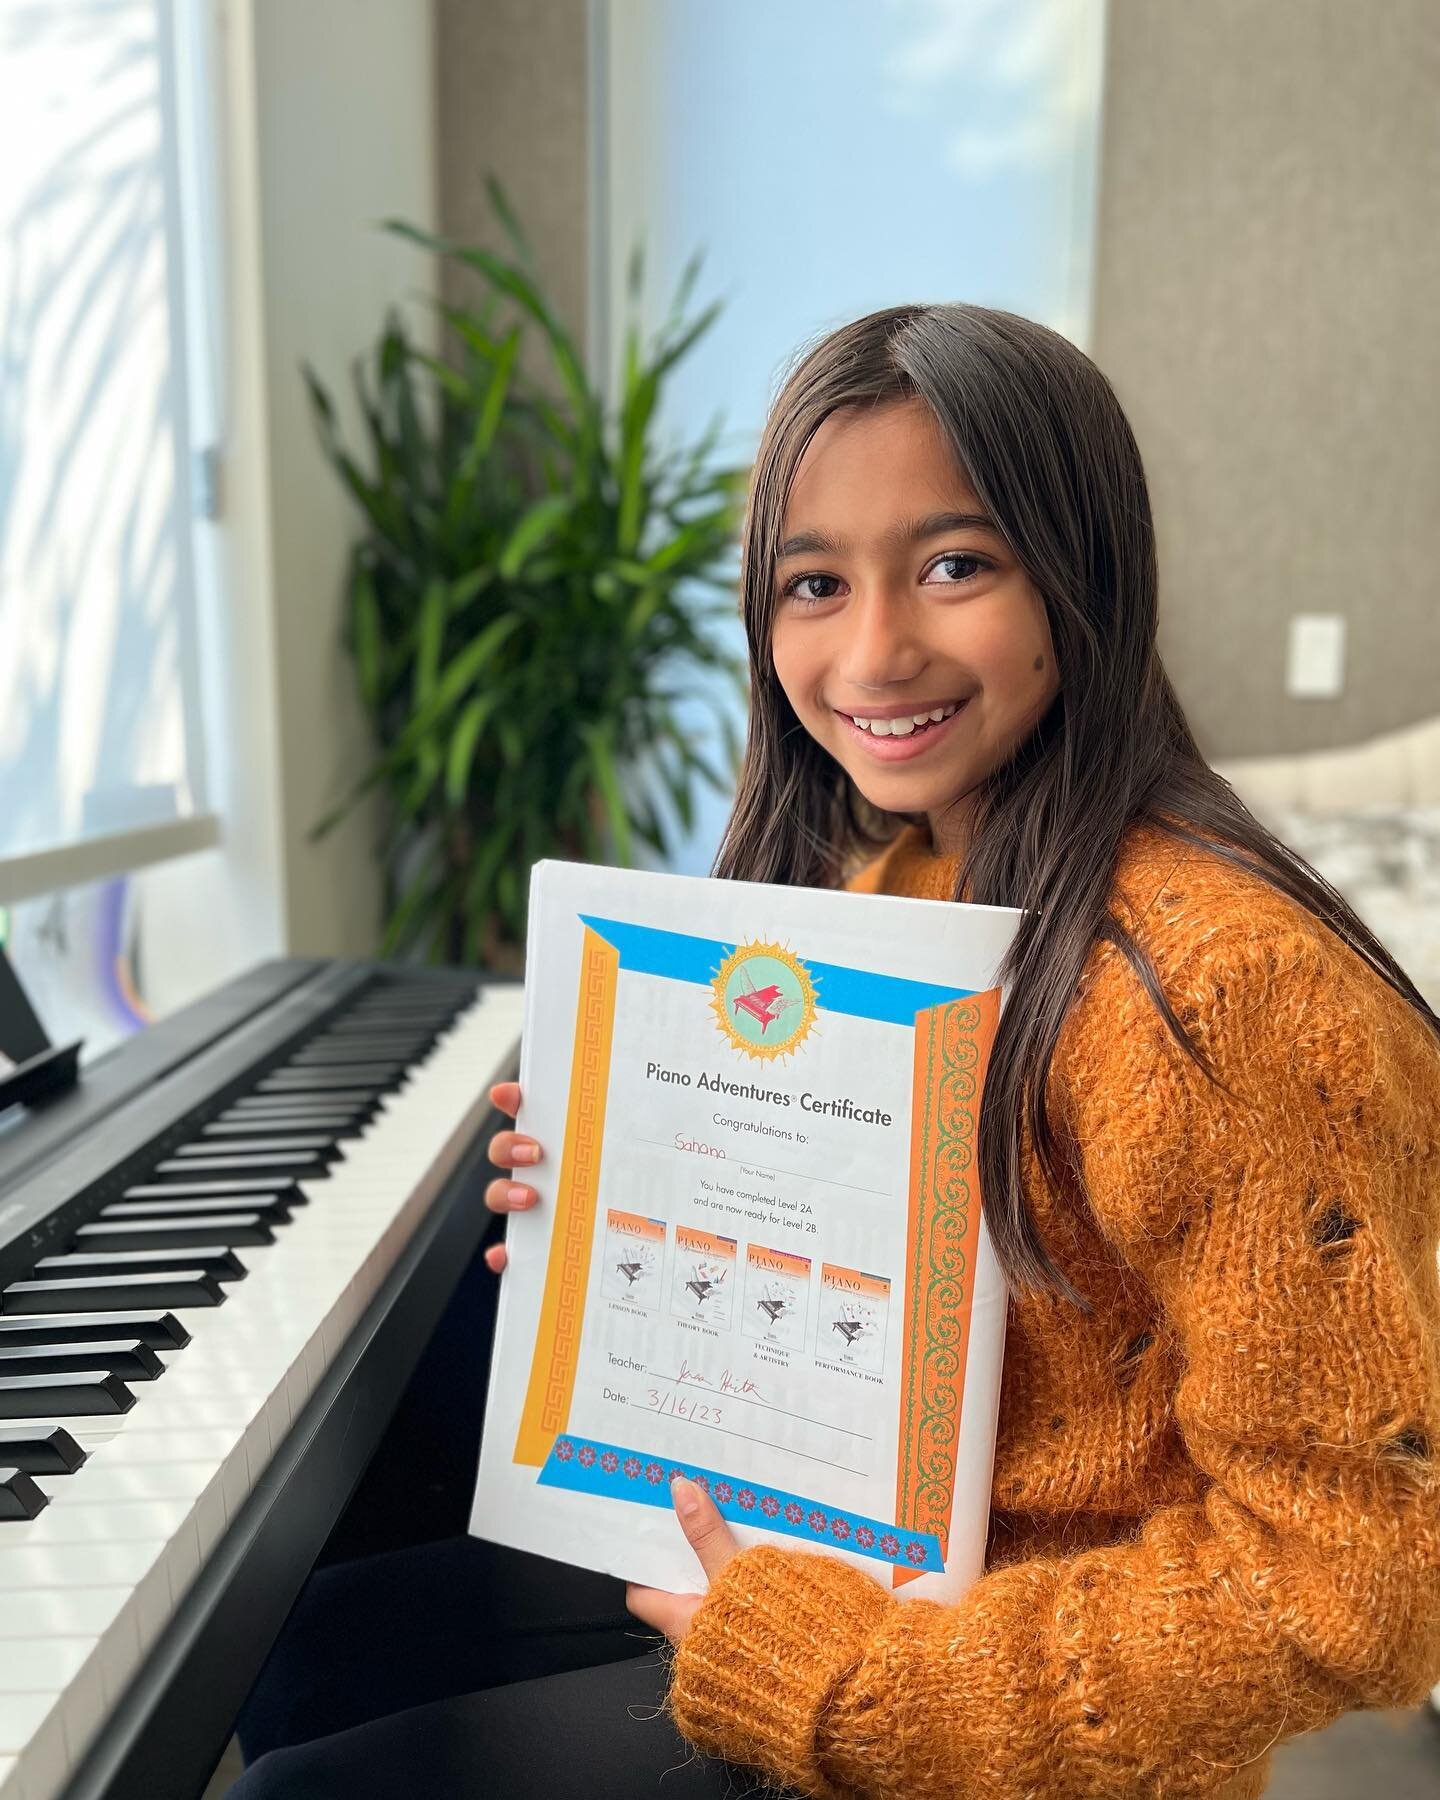 Special shout-out to my student Sahana on completing her 3rd book!  She&rsquo;s been very focused on finishing it up and her reading has improved a ton. Awesome job Sahana! 🎹 🙌 
@gunjkella 🙏 
@sandeepkella 🙏 
.
.
.
.
.
#jasonhirthmusic #pianoless